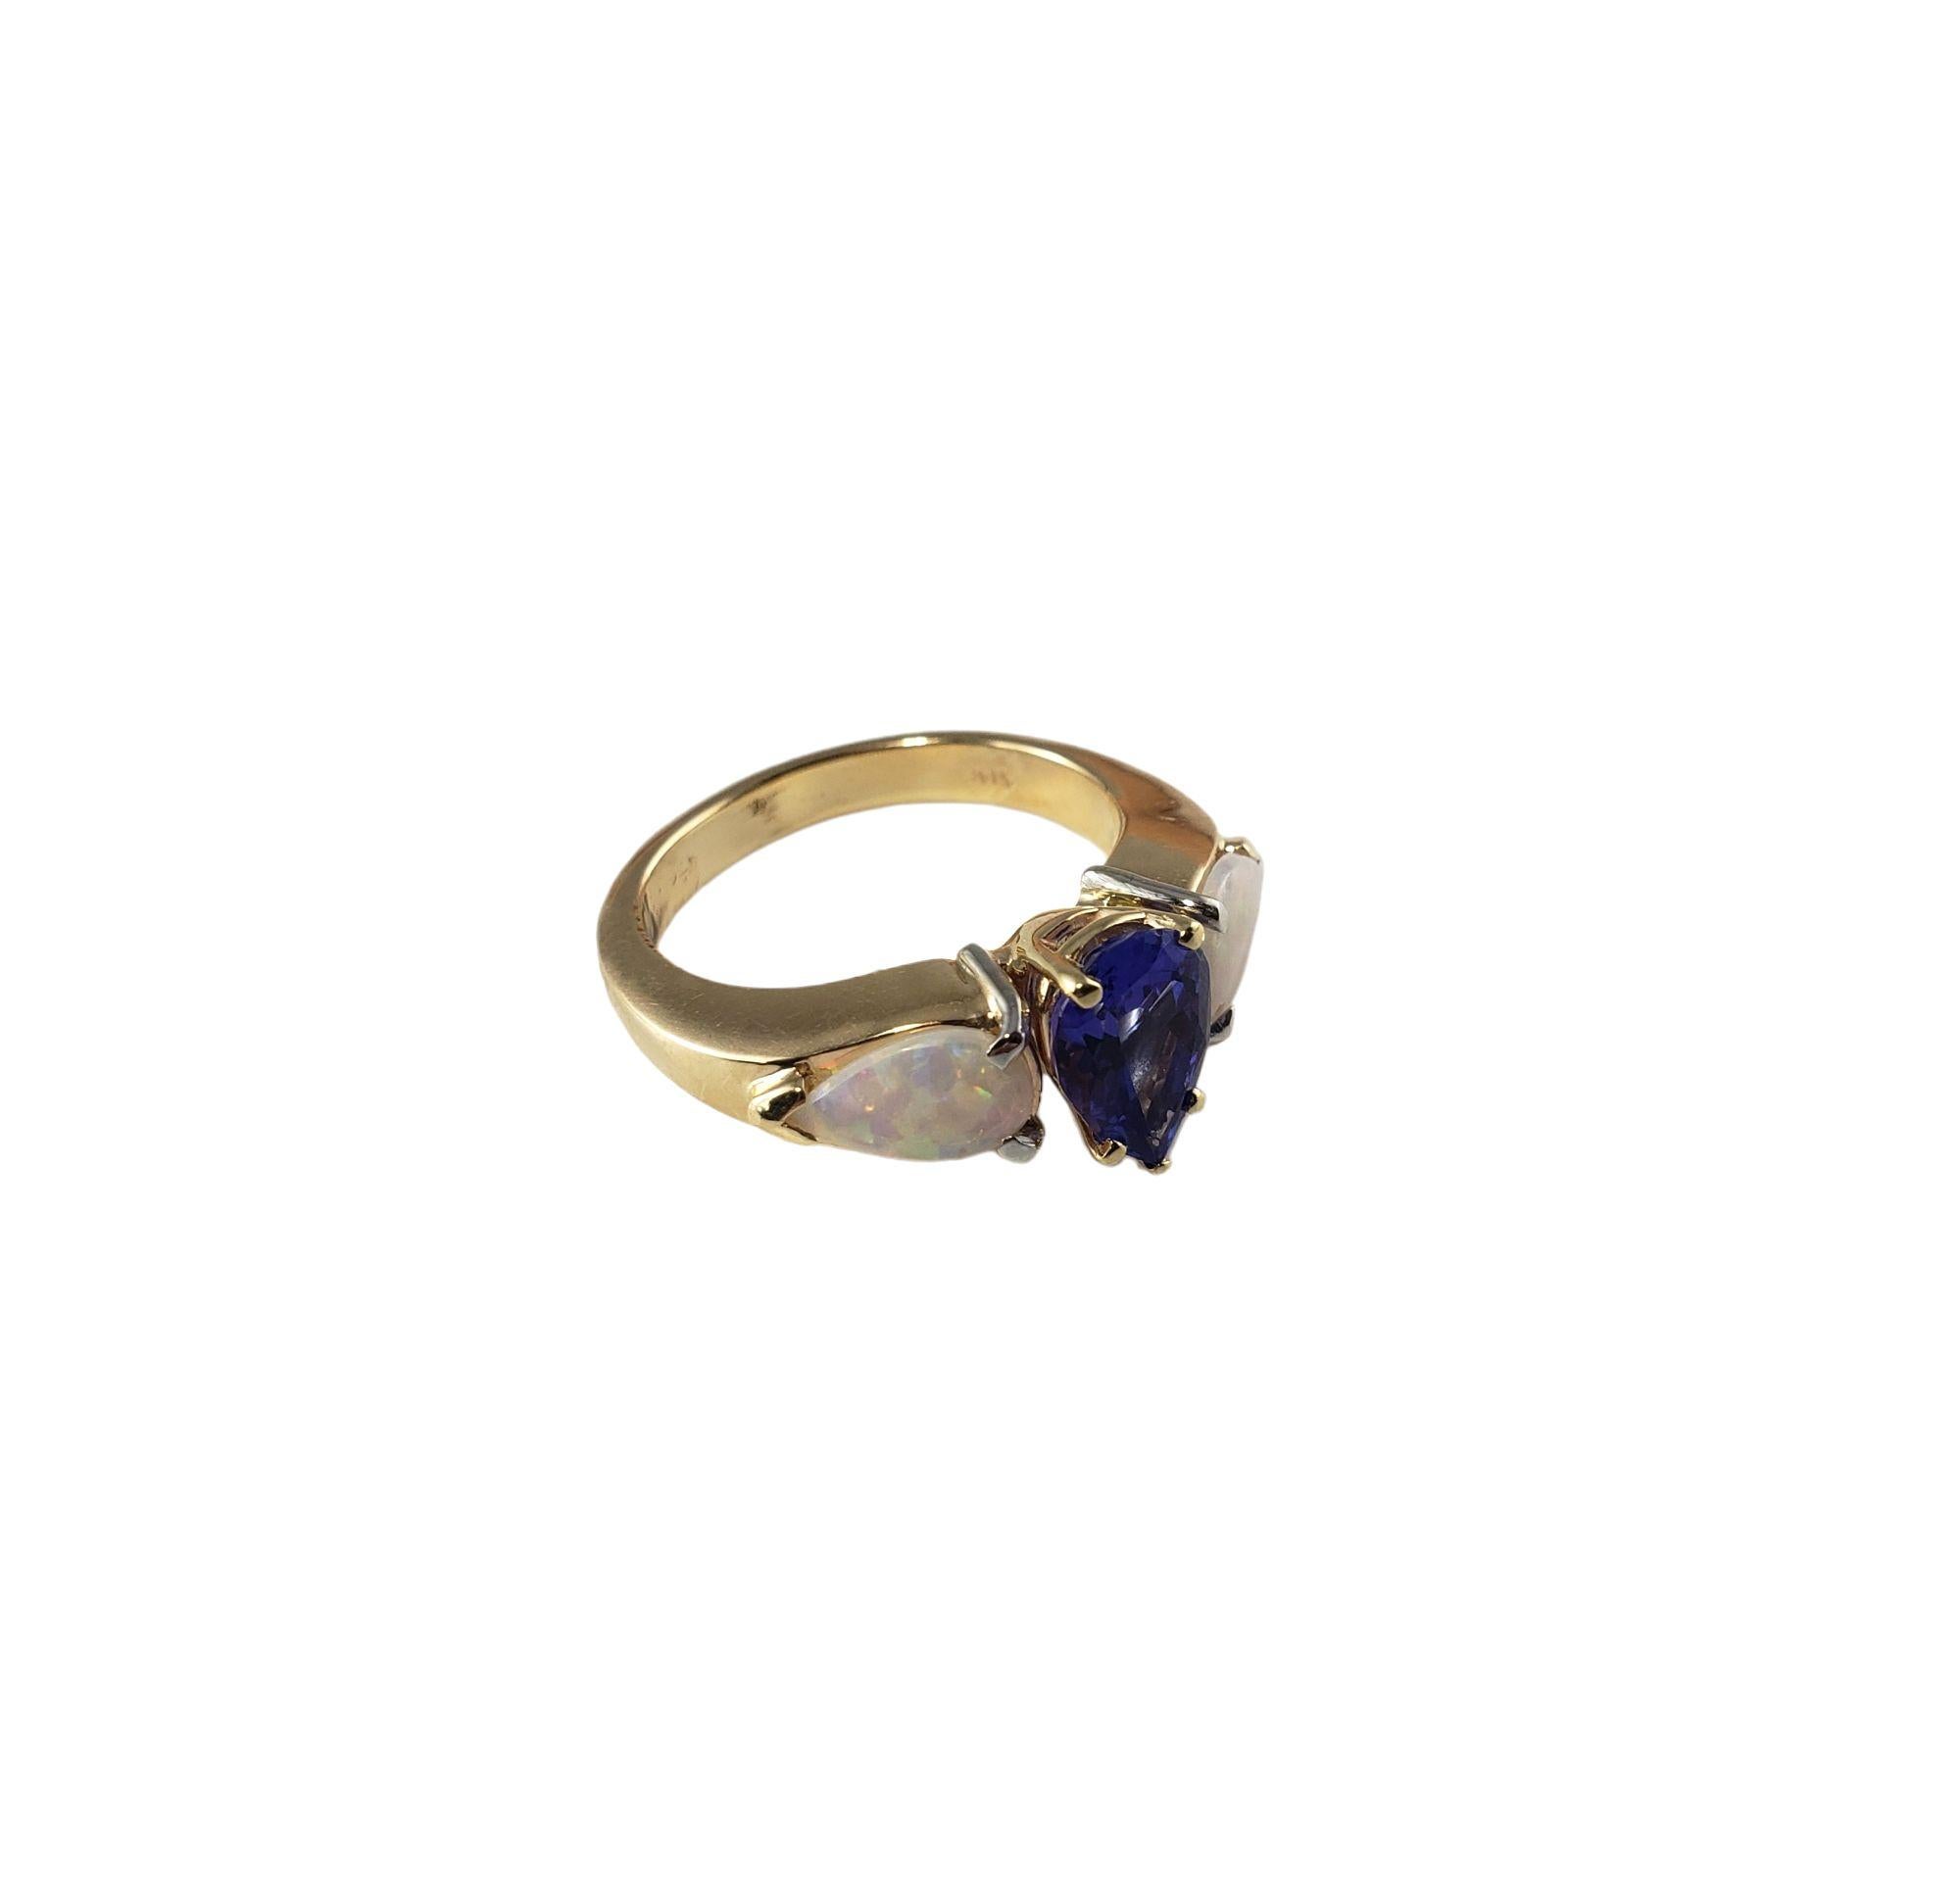 Vintage 14 Karat Yellow Gold Tanzanite and Opal Ring Size 7.25-7.5 JAGi Certified-

This lovely ring features one pear shaped tanzanite (9 mm x 6 mm) and two cabochon pear shaped white opals (8 mm x 5 mm) set in classic 14K yellow gold. Shank: 3